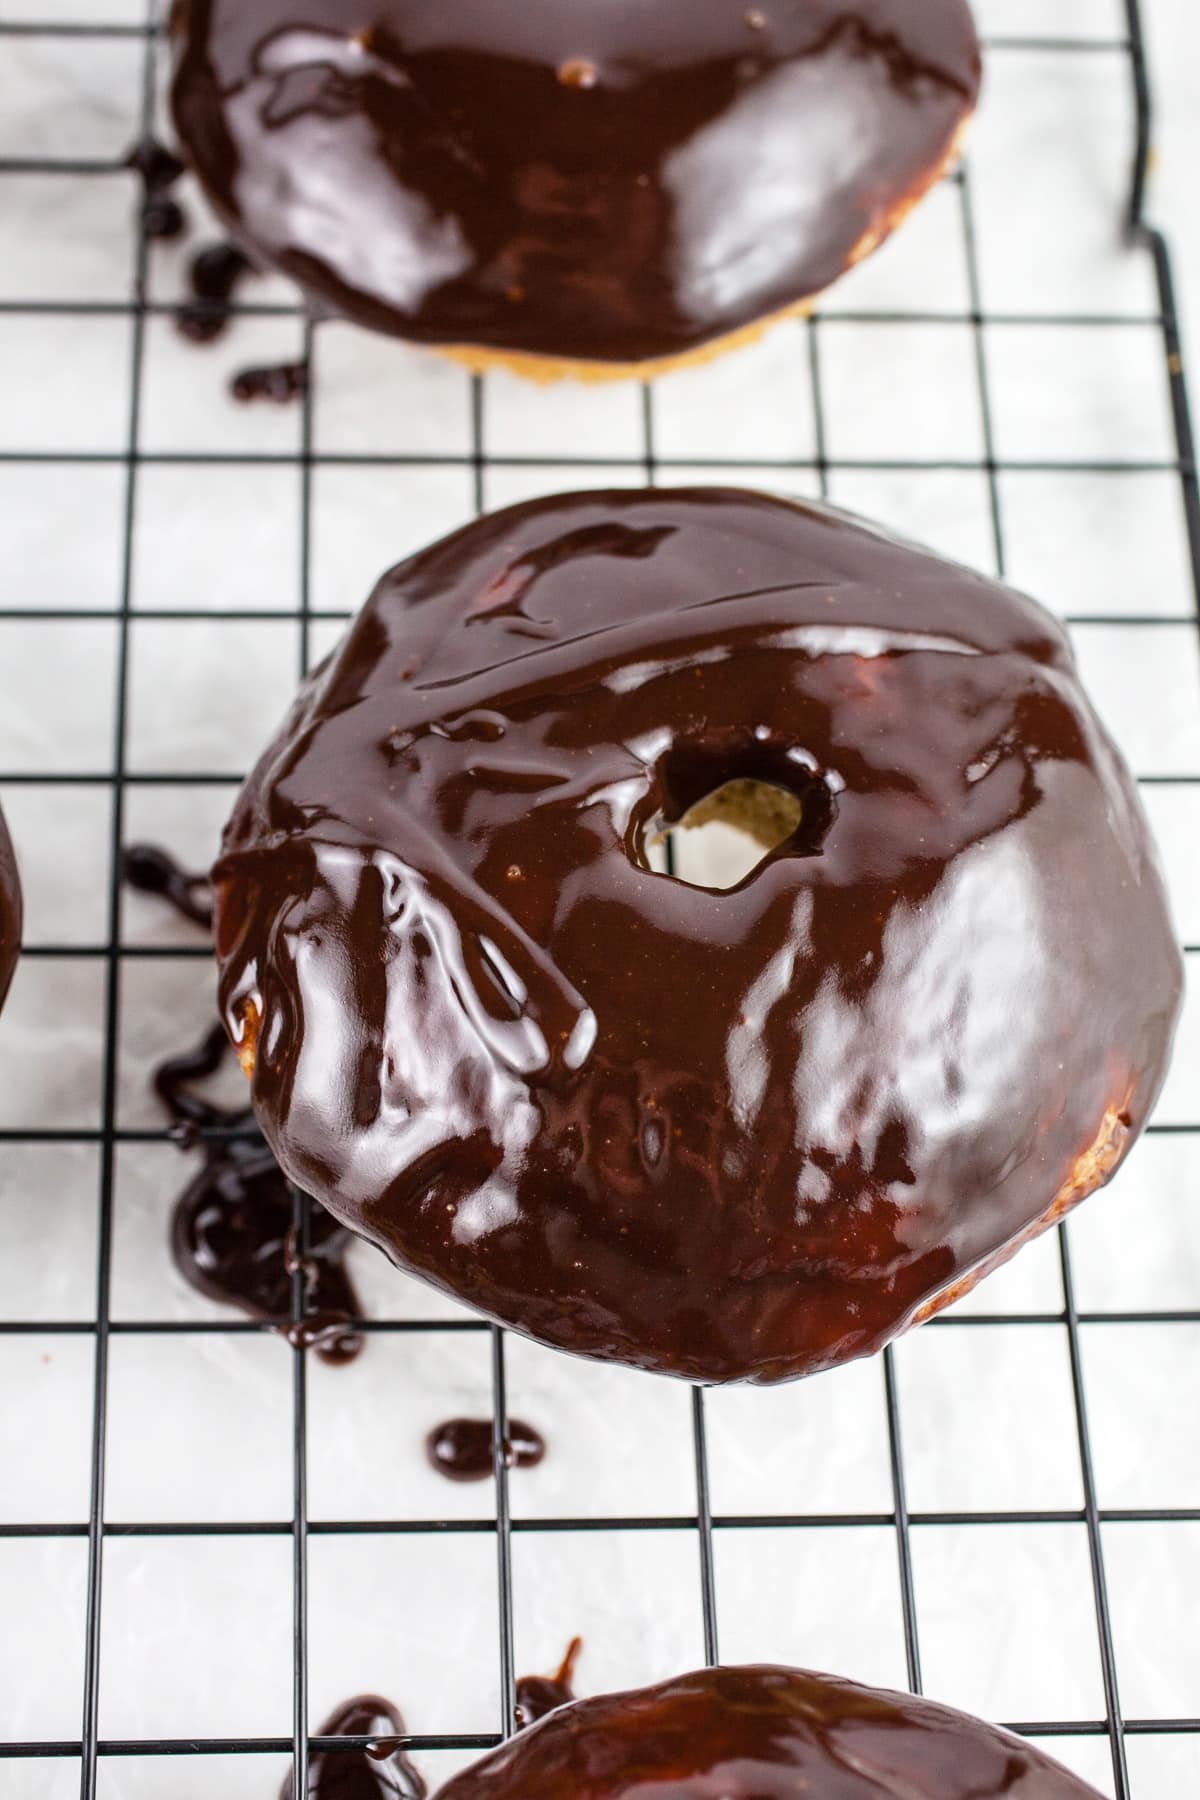 Doughnuts dipped in chocolate on cooling rack.